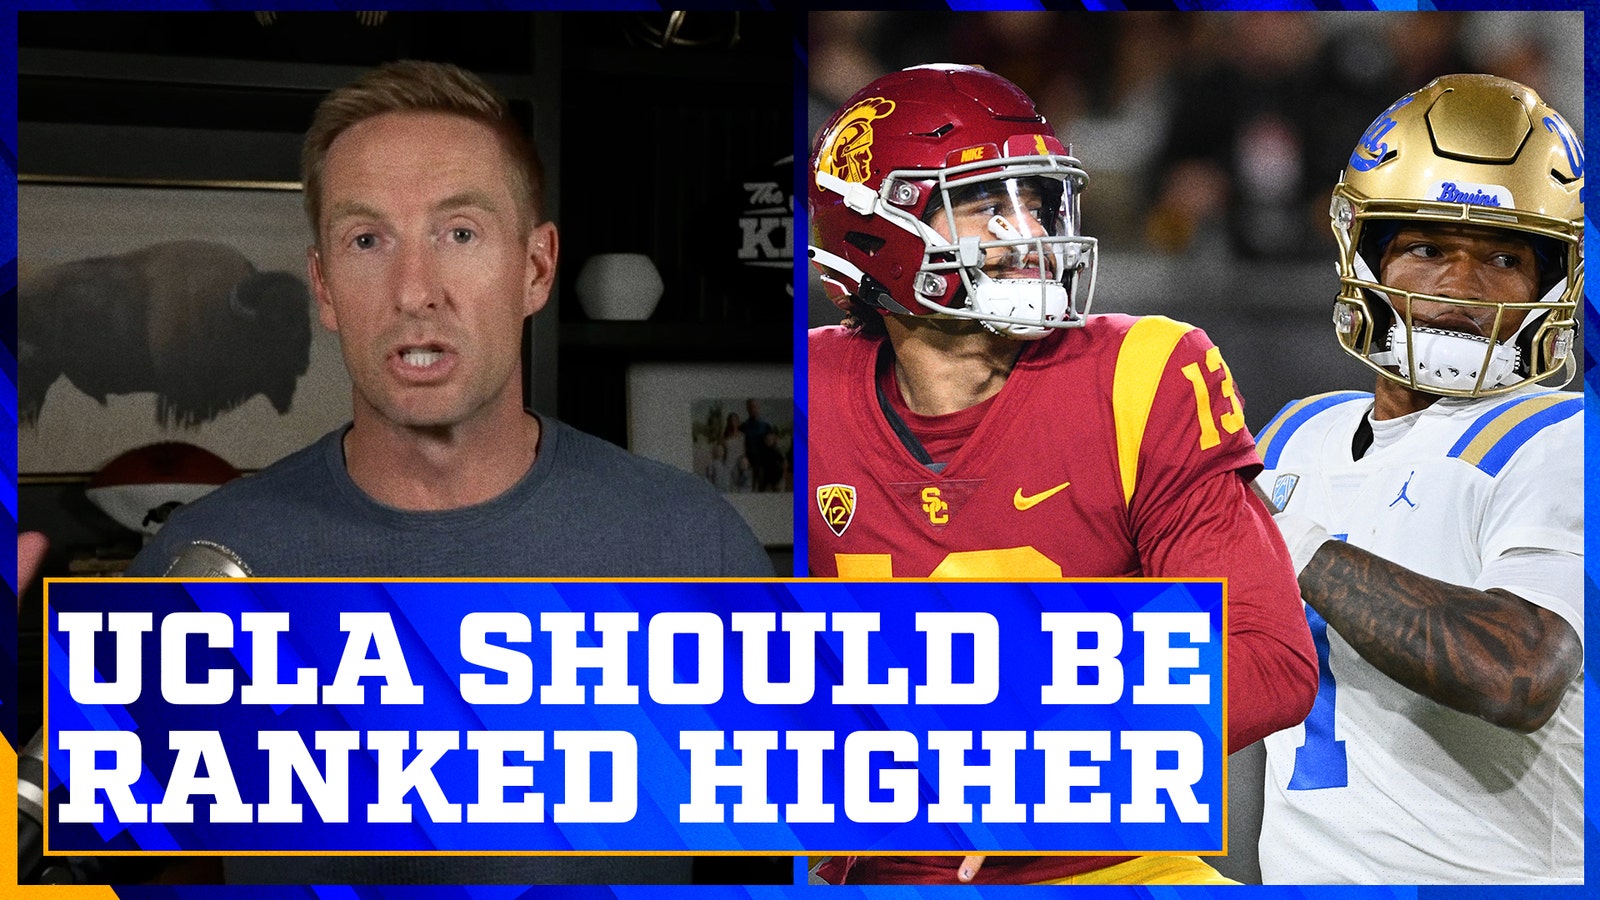 UCLA shouldn't be ranked lower than USC